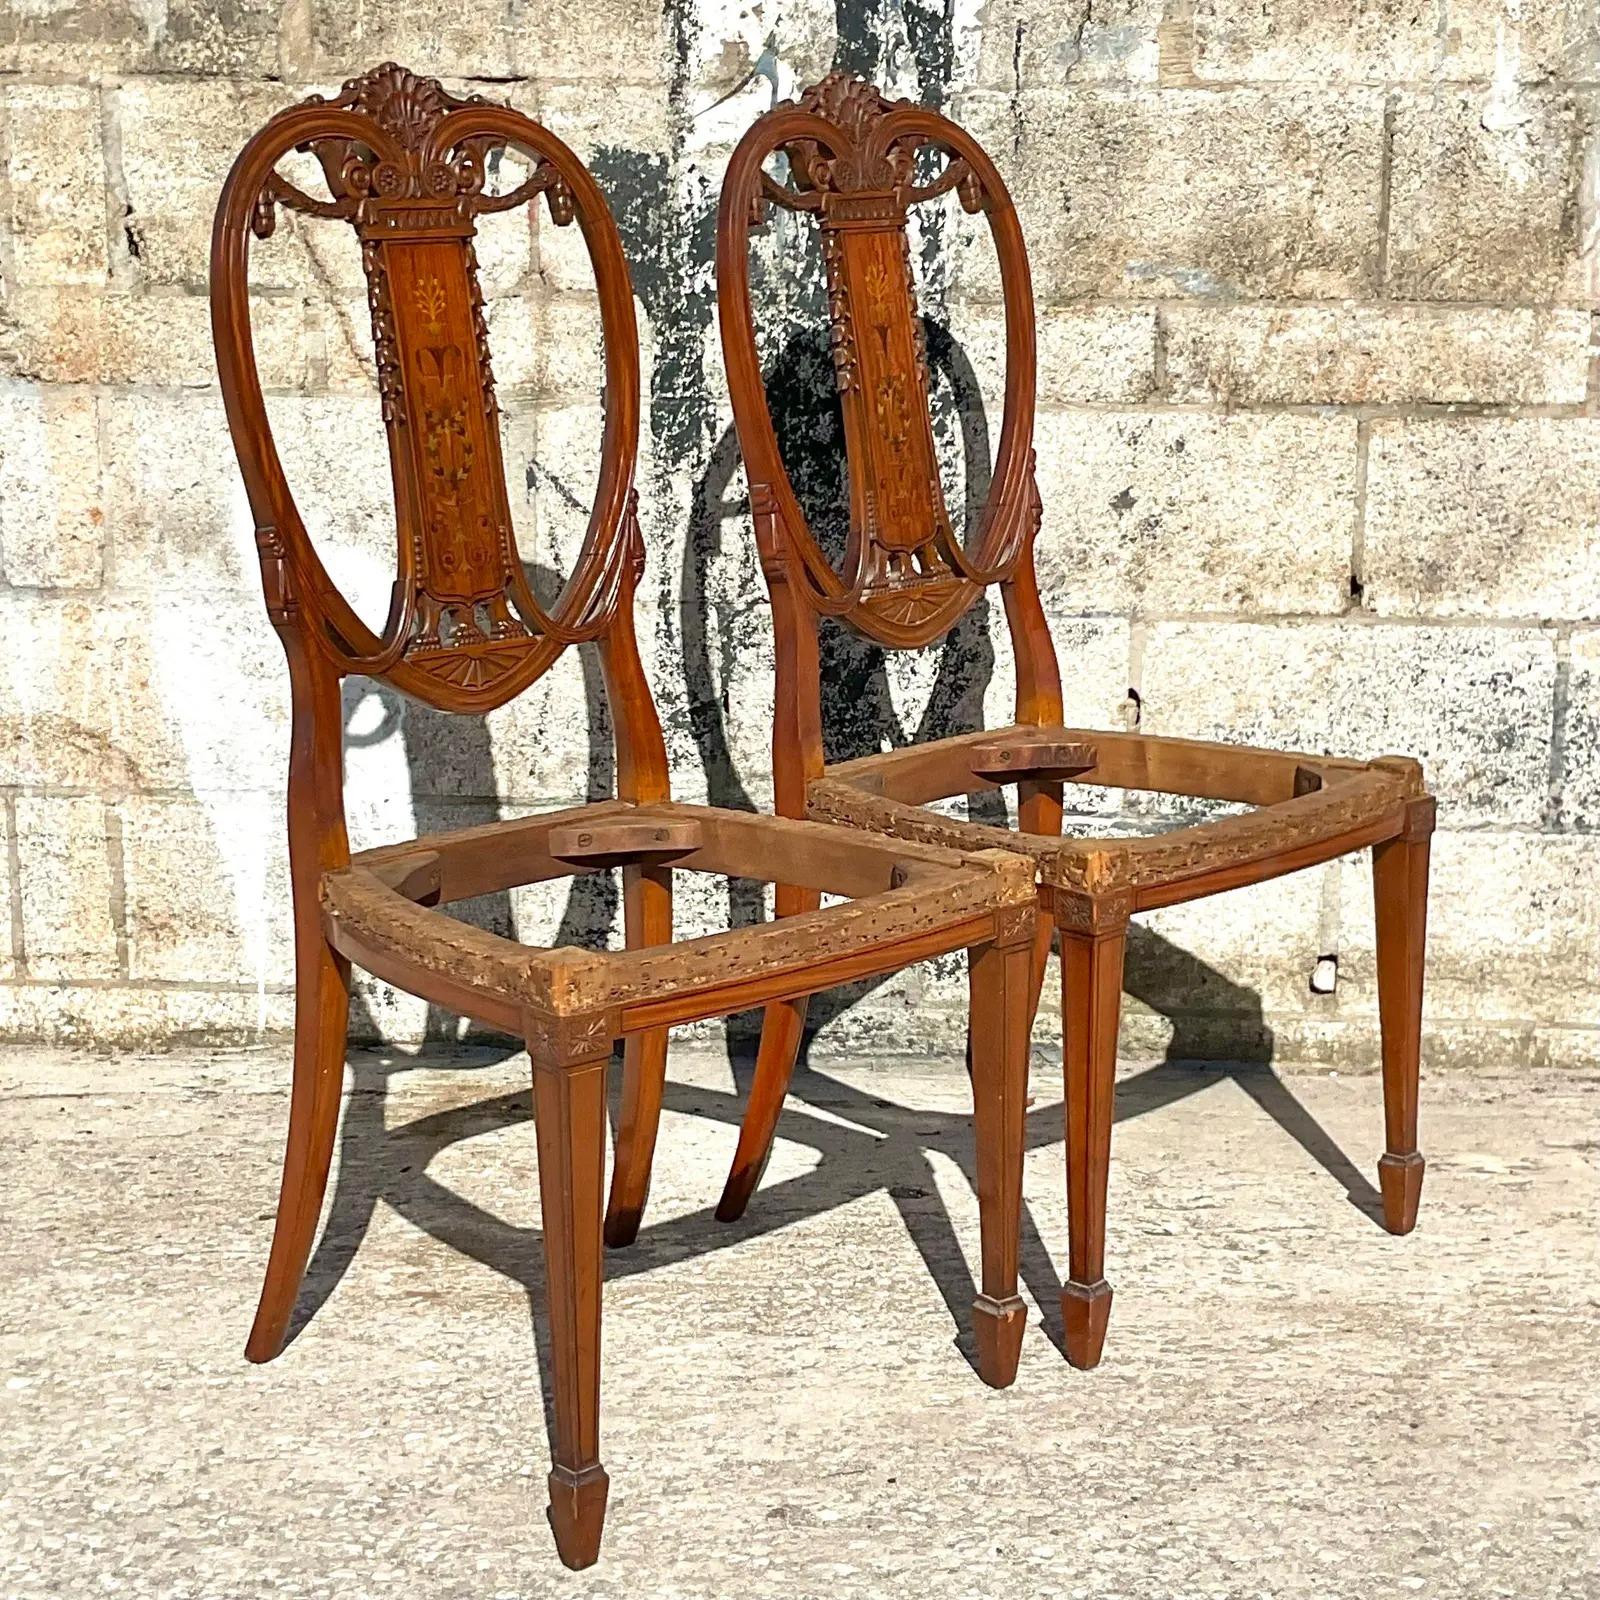 Vintage pair of Regency Balloon back dining chairs. Beautiful hand carved swags with chic inlay marquetry detail. We removed the seats so it’s all set for you to add your own fabric! Acquired from a Palm Beach estate.

